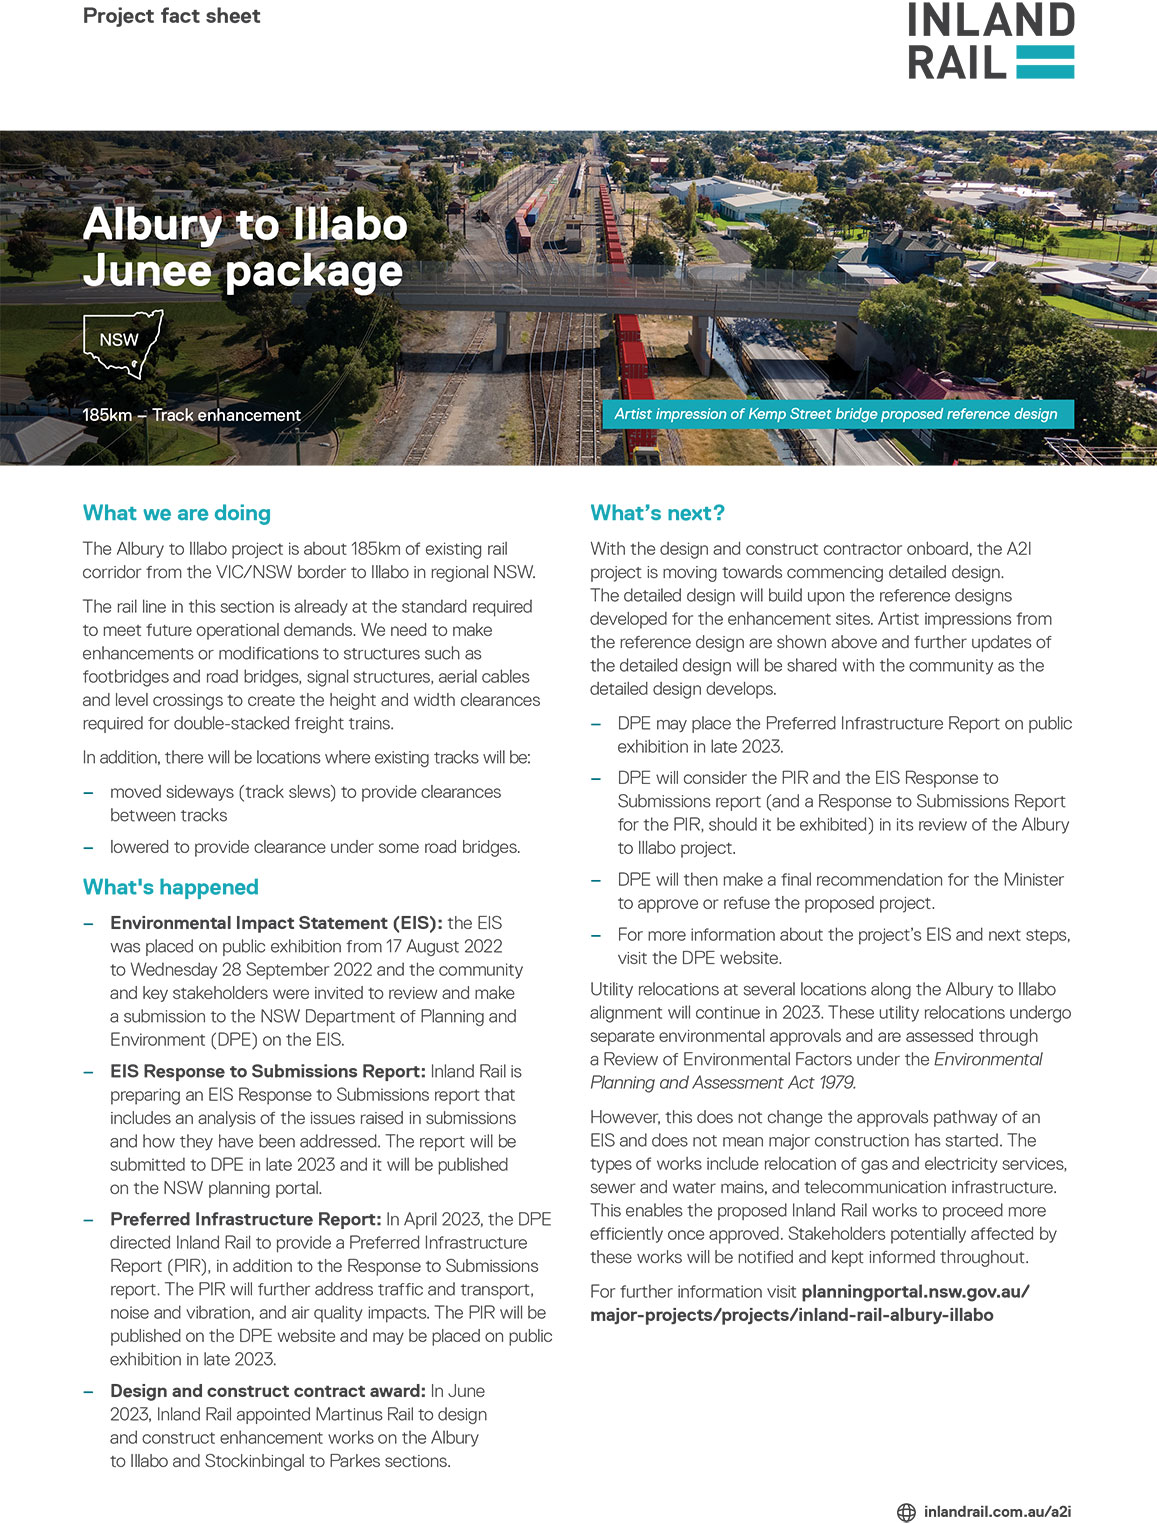 Image thumbnail for Albury to Illabo – Junee package project fact sheet